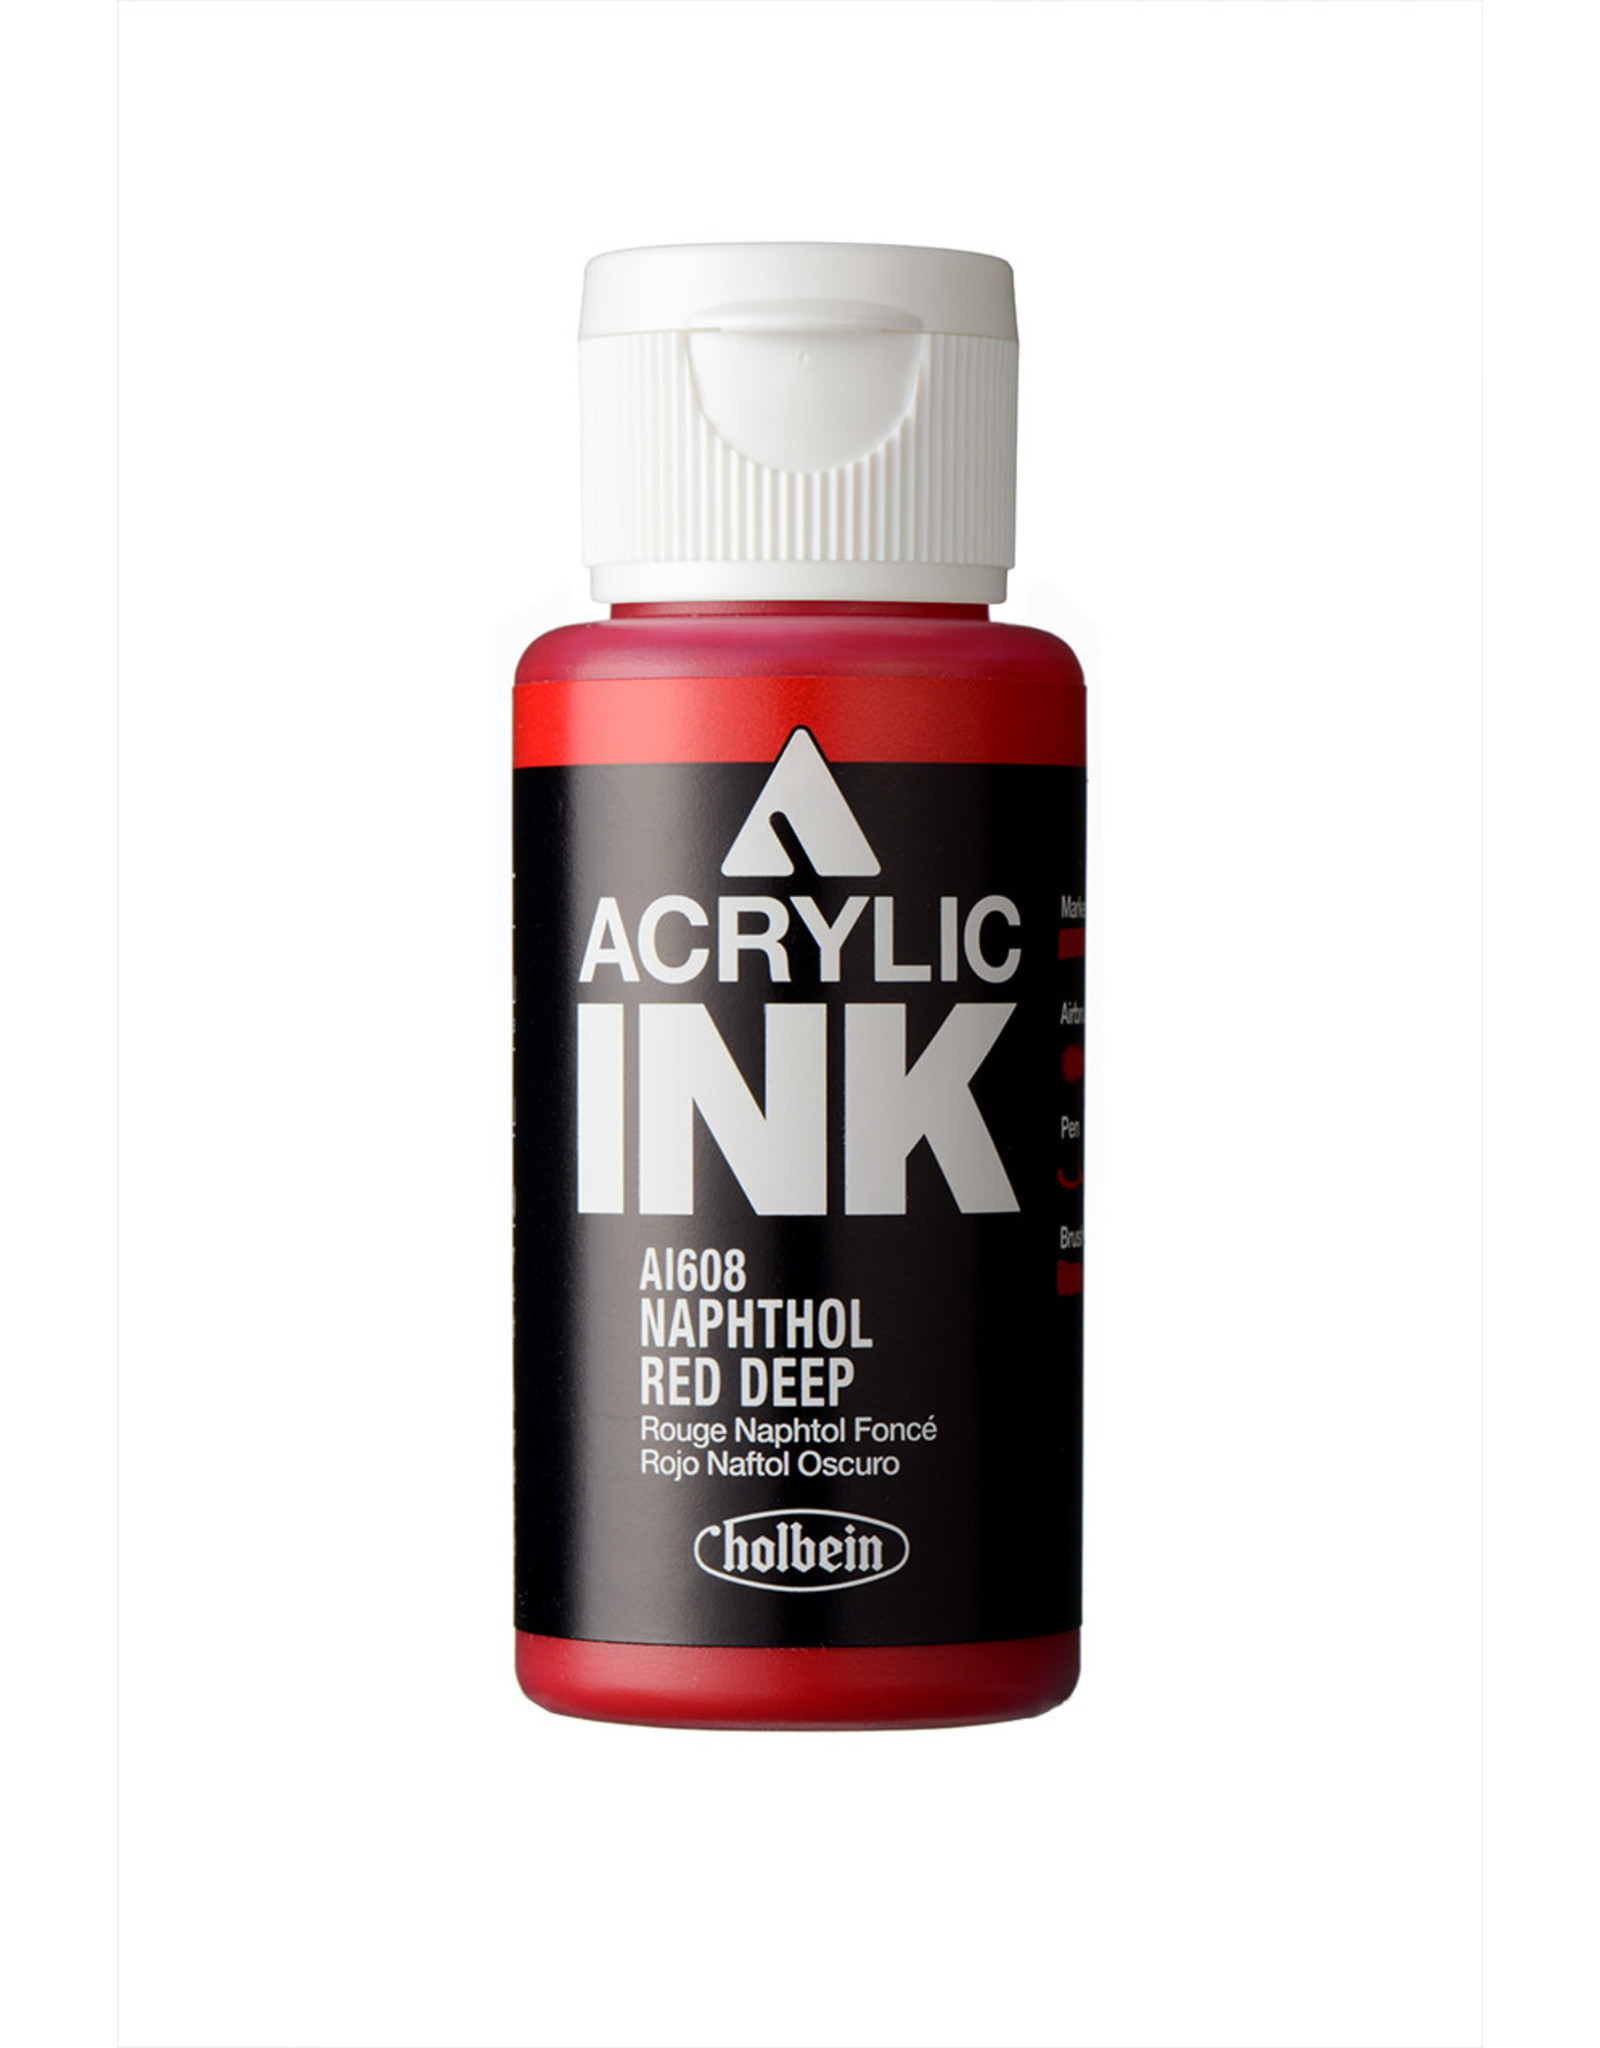 CLEARANCE Holbein Acrylic Ink, Napthol Red Deep, 30ml